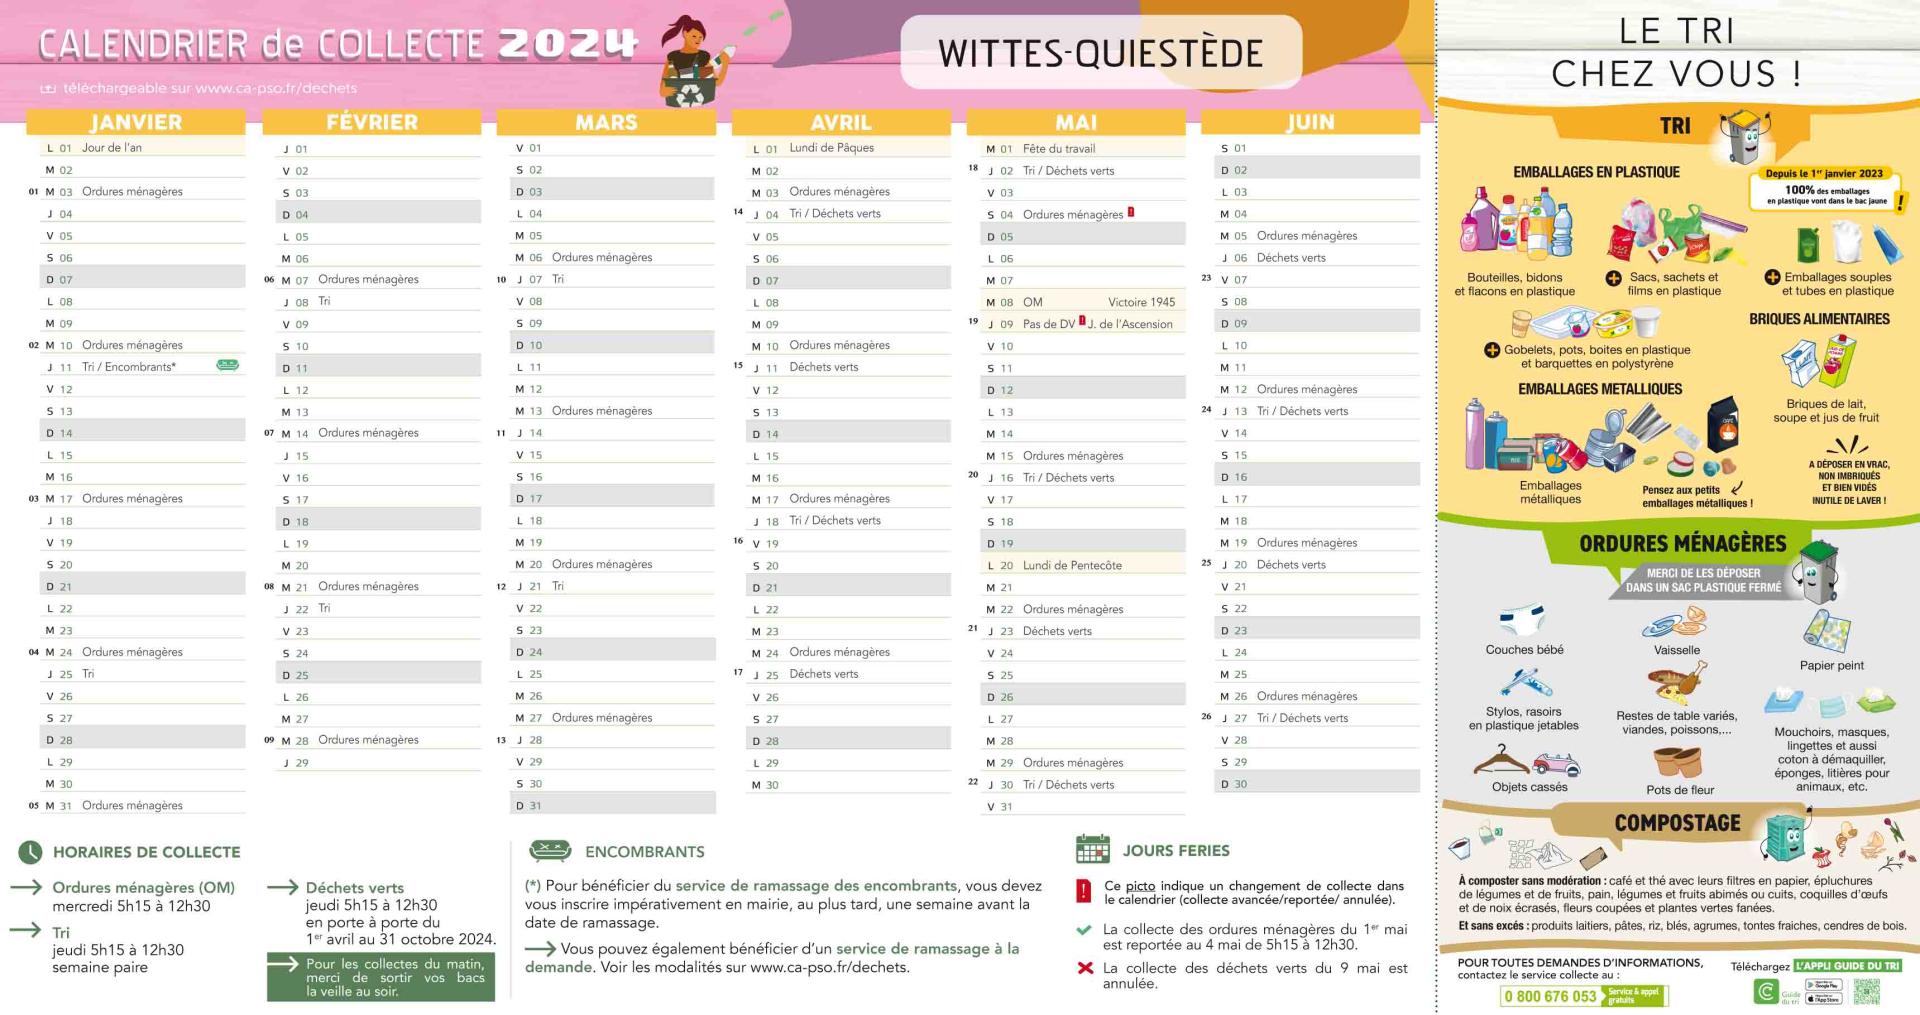 Wittes quiestede calendrier 2024 web 1